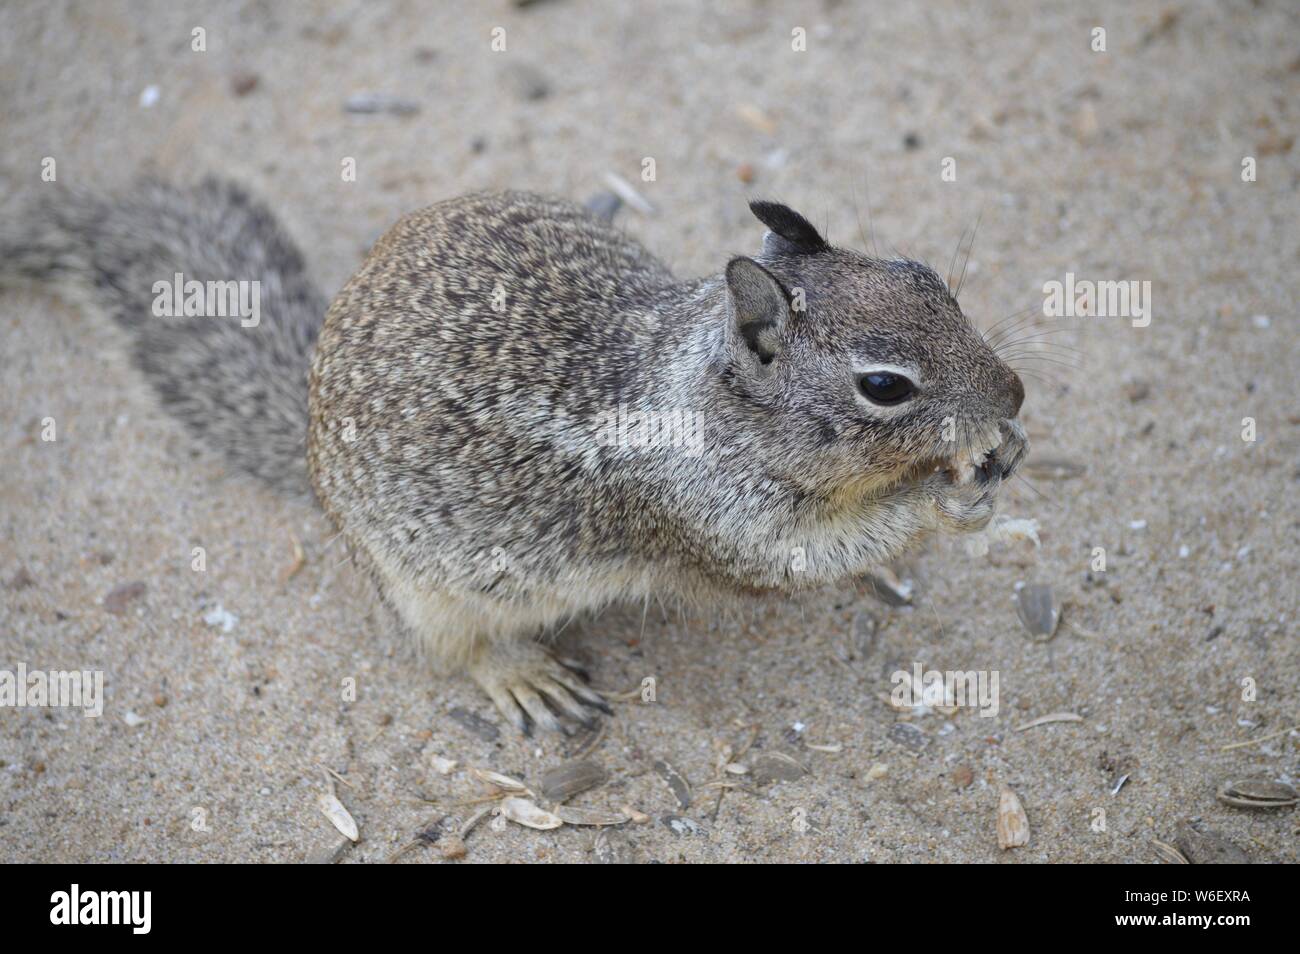 eating and enjoying - little squirrel in California Stock Photo